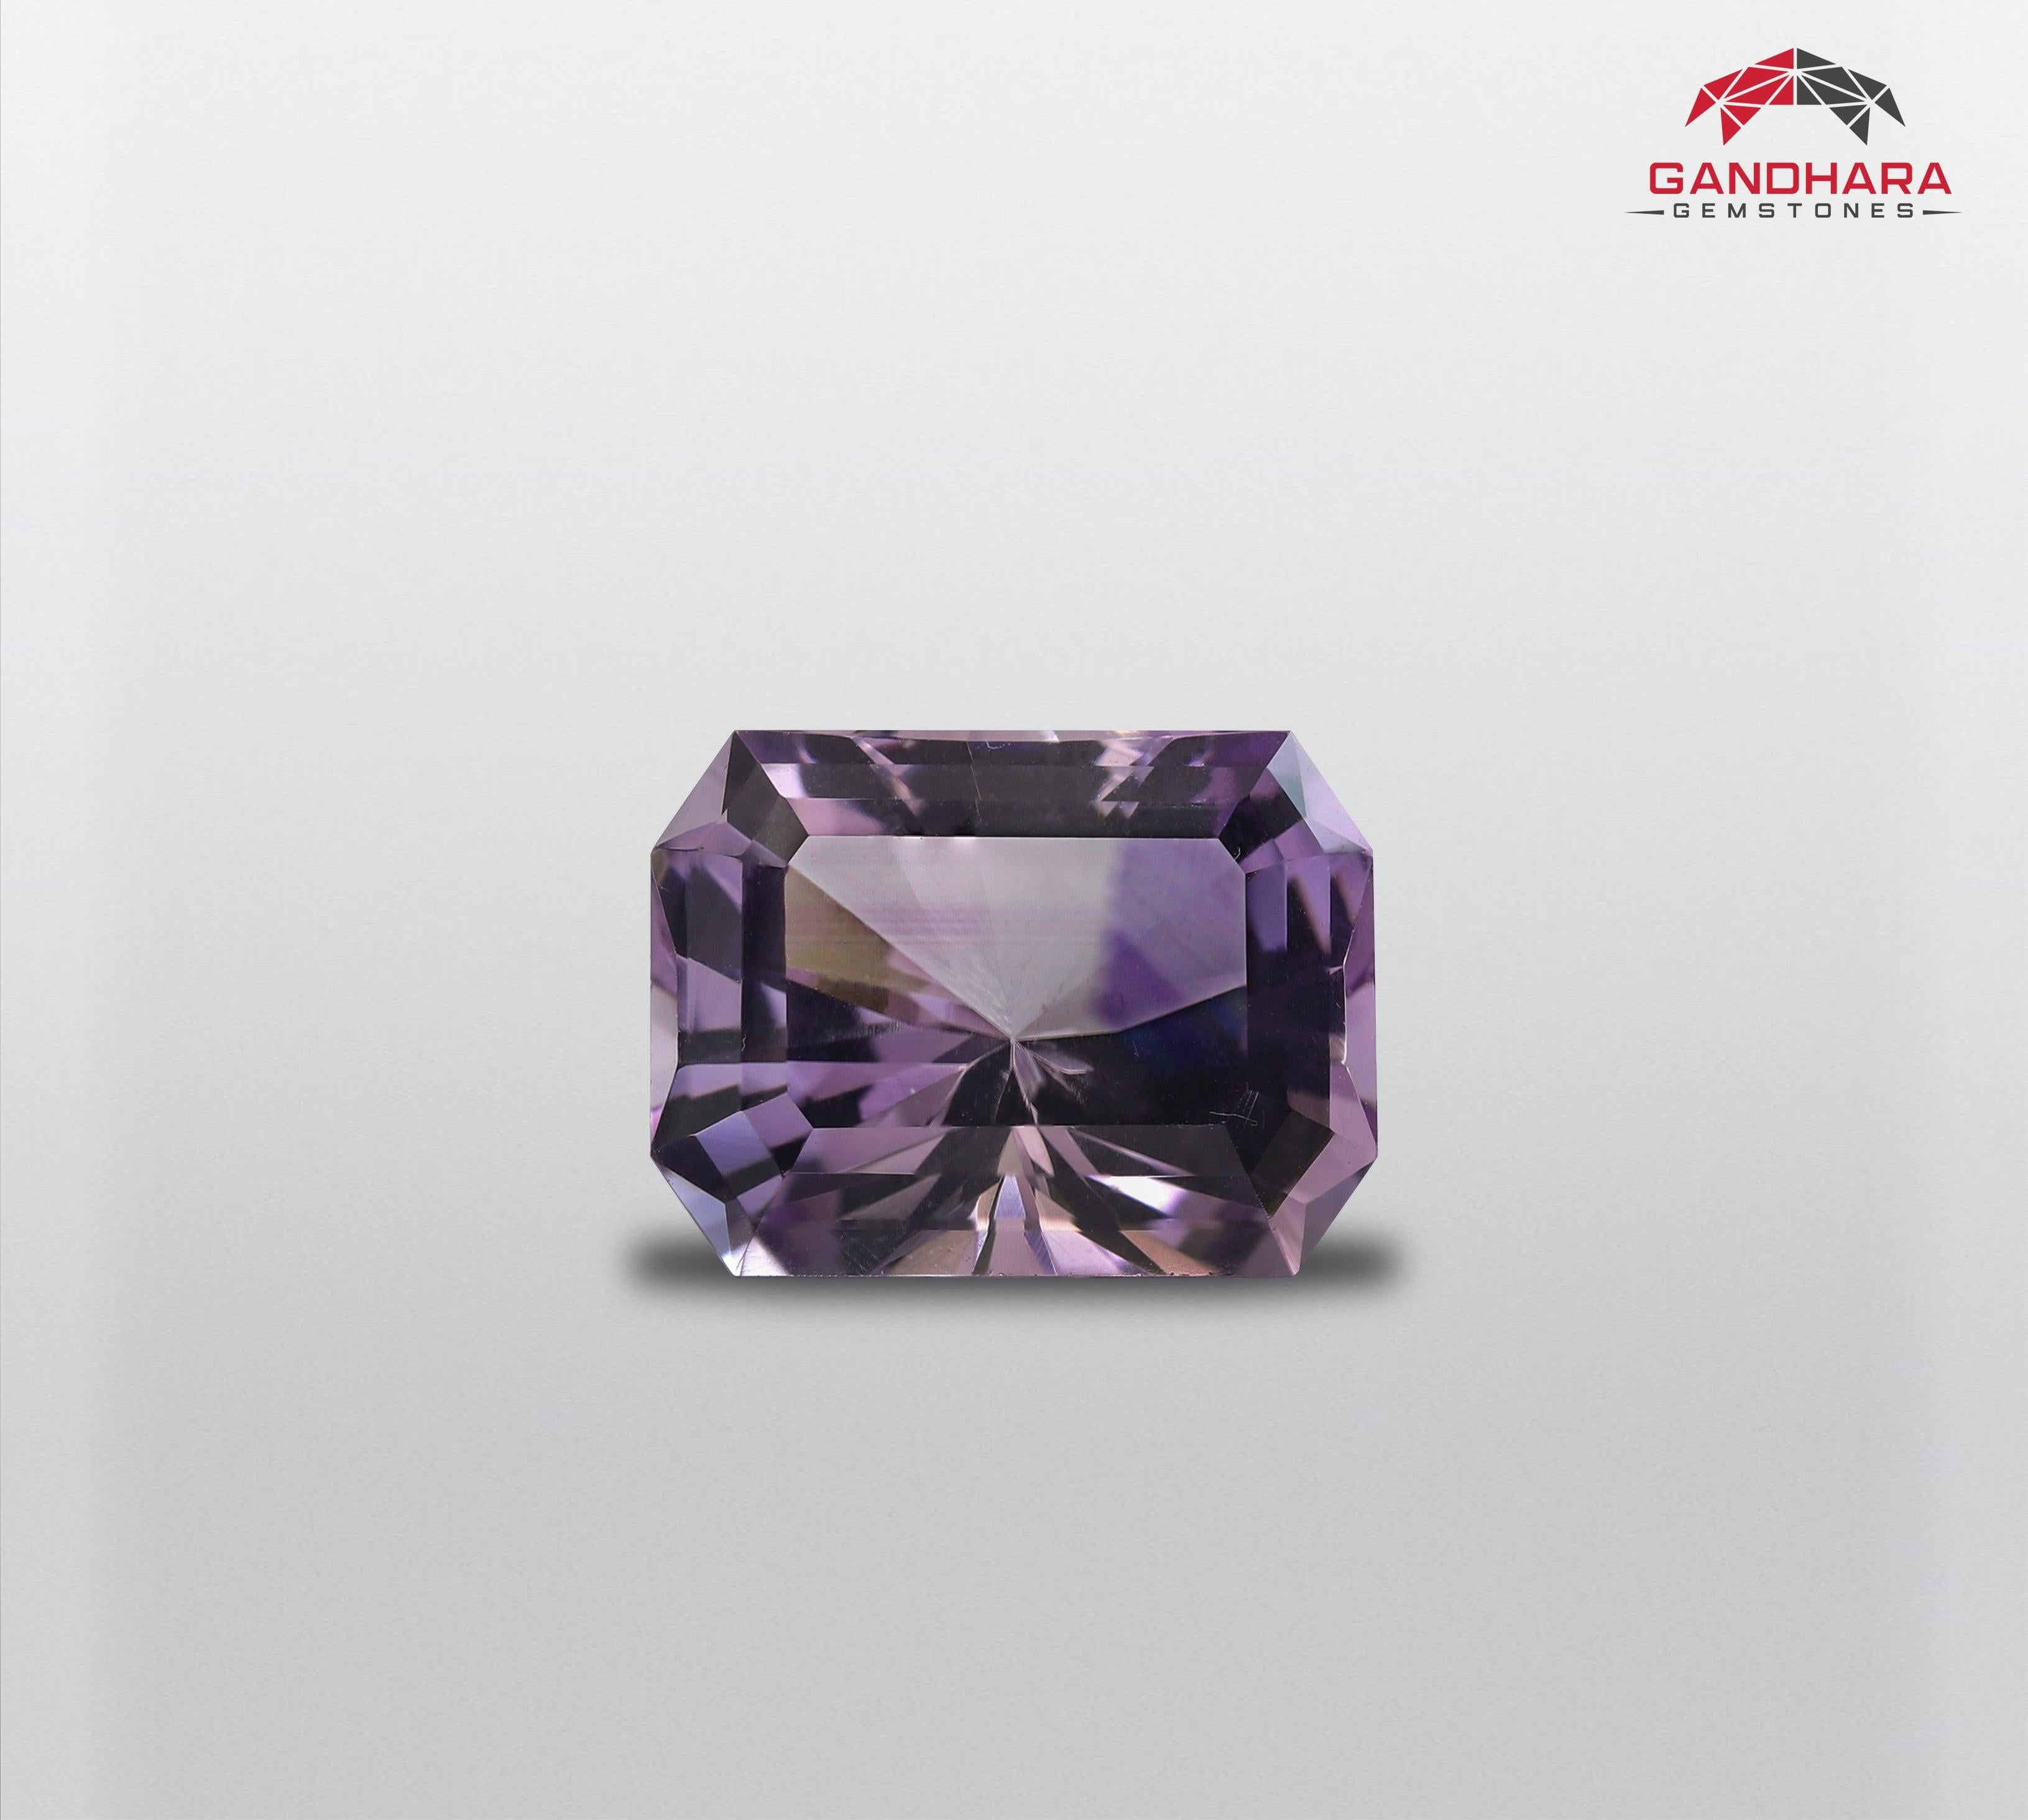 Beautiful Color Zoning in Amethyst from Brazil, Available For Sale, Natural High Quality Flawless 8.11 Carats, Precision Custom Cut, Certified Amethyst From Brazil.

 Product Information:
GEMSTONE TYPE	Beautiful Color Zoning in Amethyst from